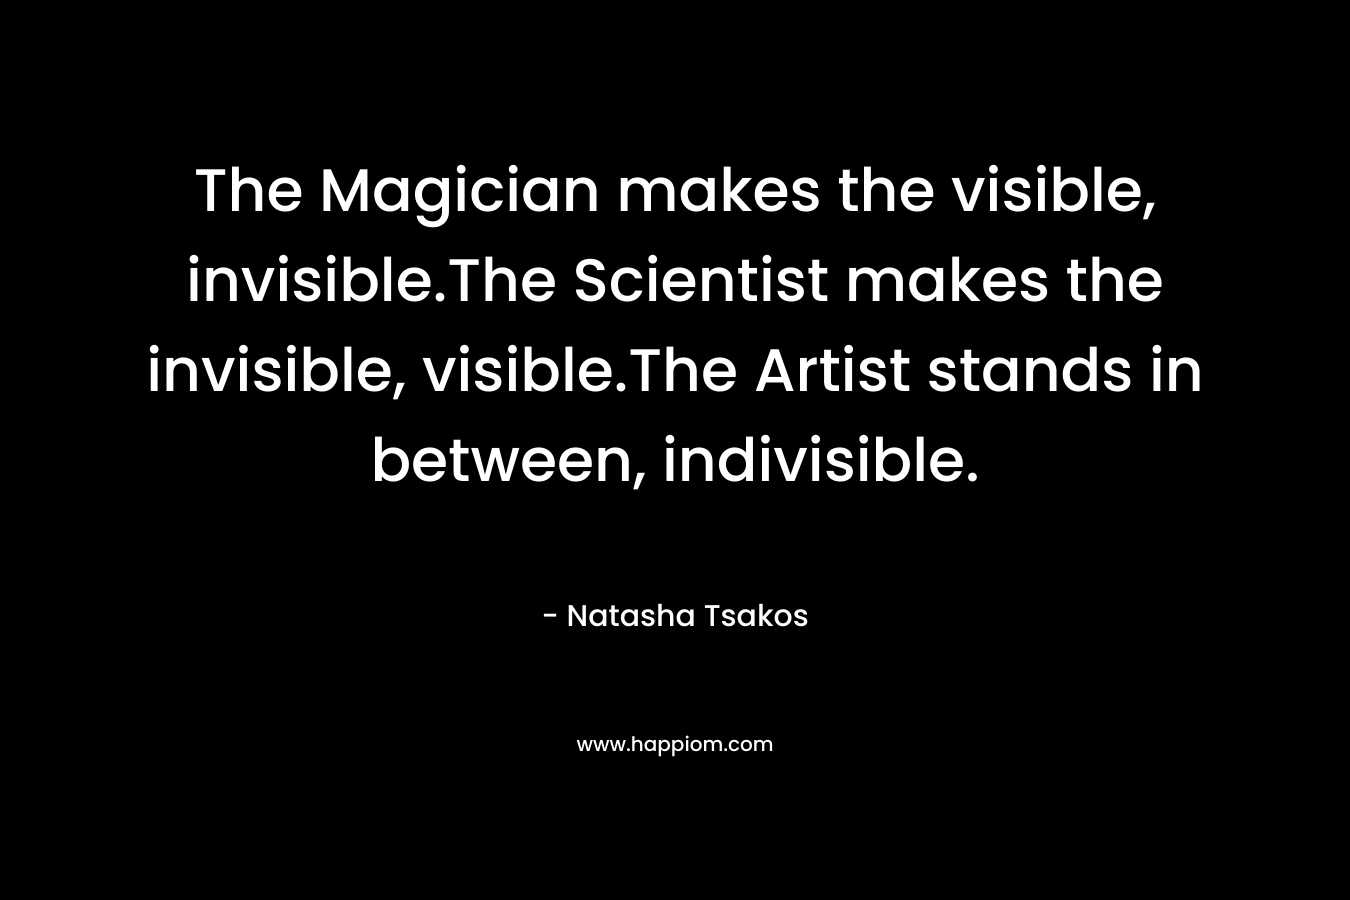 The Magician makes the visible, invisible.The Scientist makes the invisible, visible.The Artist stands in between, indivisible.